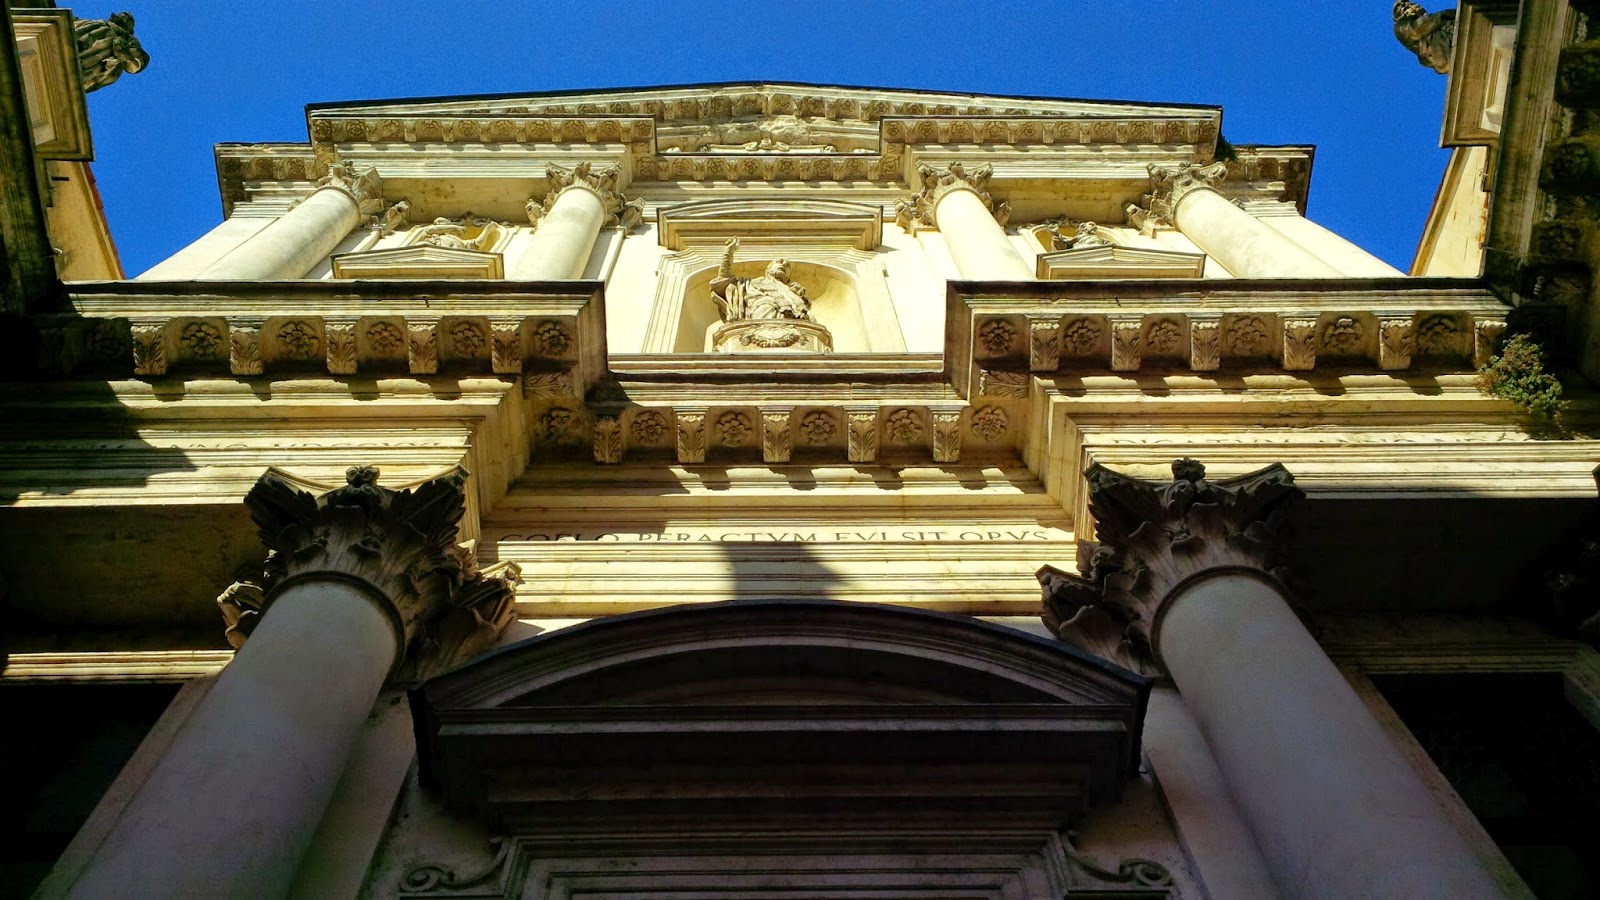 The sun lights up the facade of a church in Vicenza